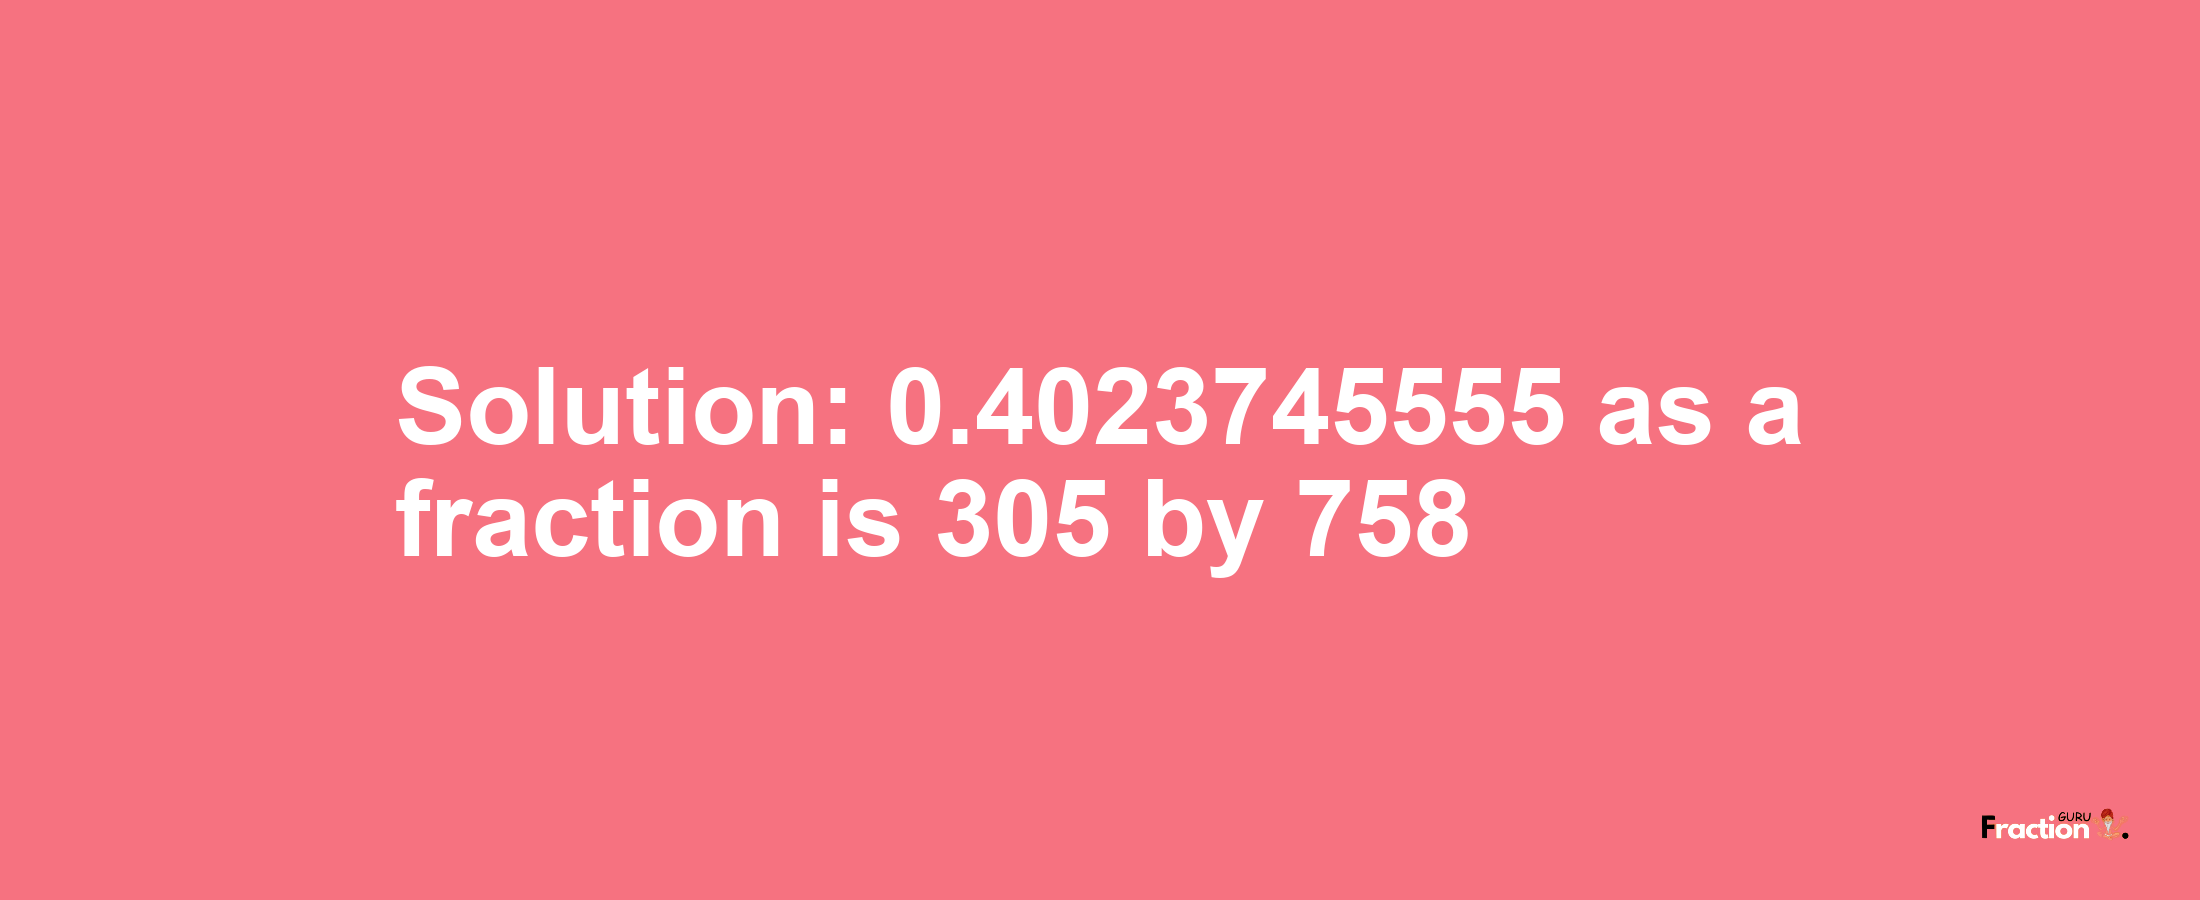 Solution:0.4023745555 as a fraction is 305/758